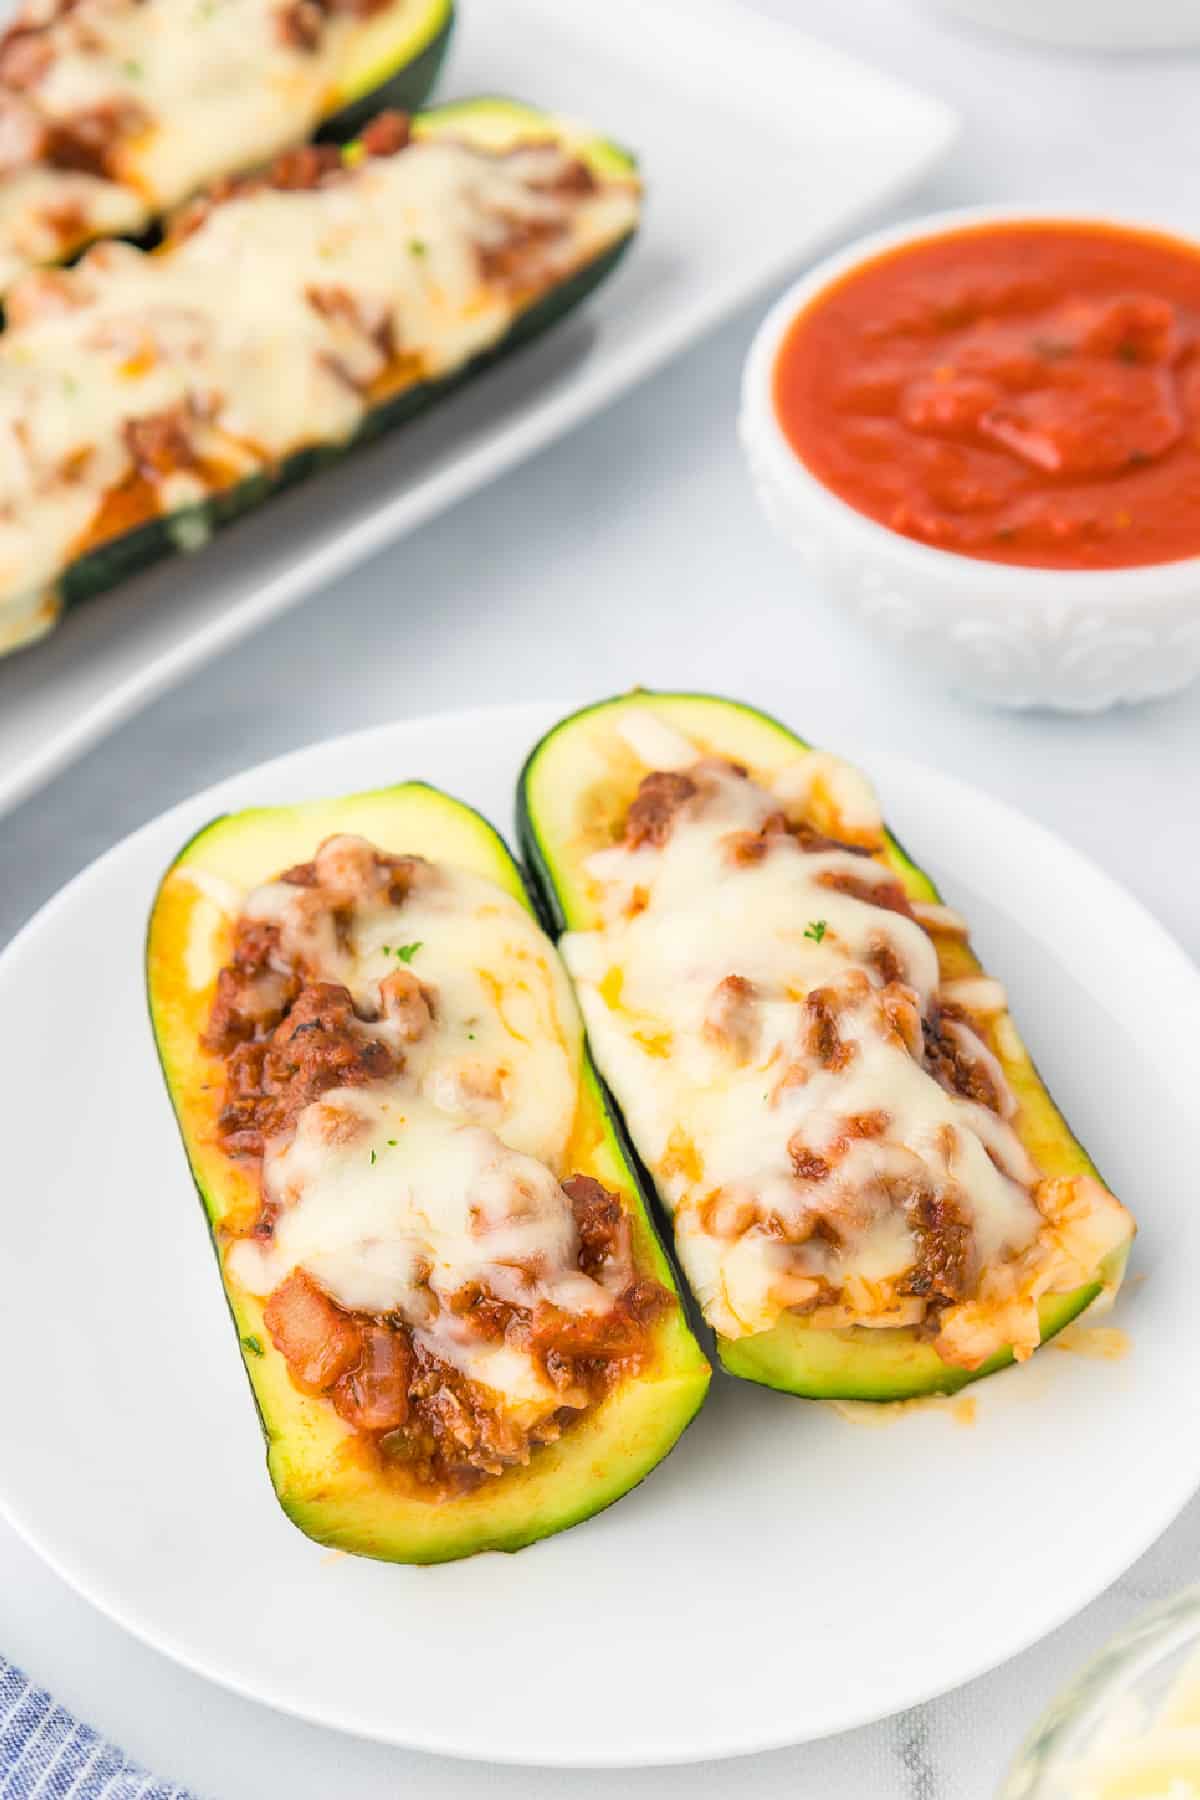 A stuffed zucchini boat sliced in half on a plate with marinara in a bowl nearby and more zucchini on a platter in the background on the counter.